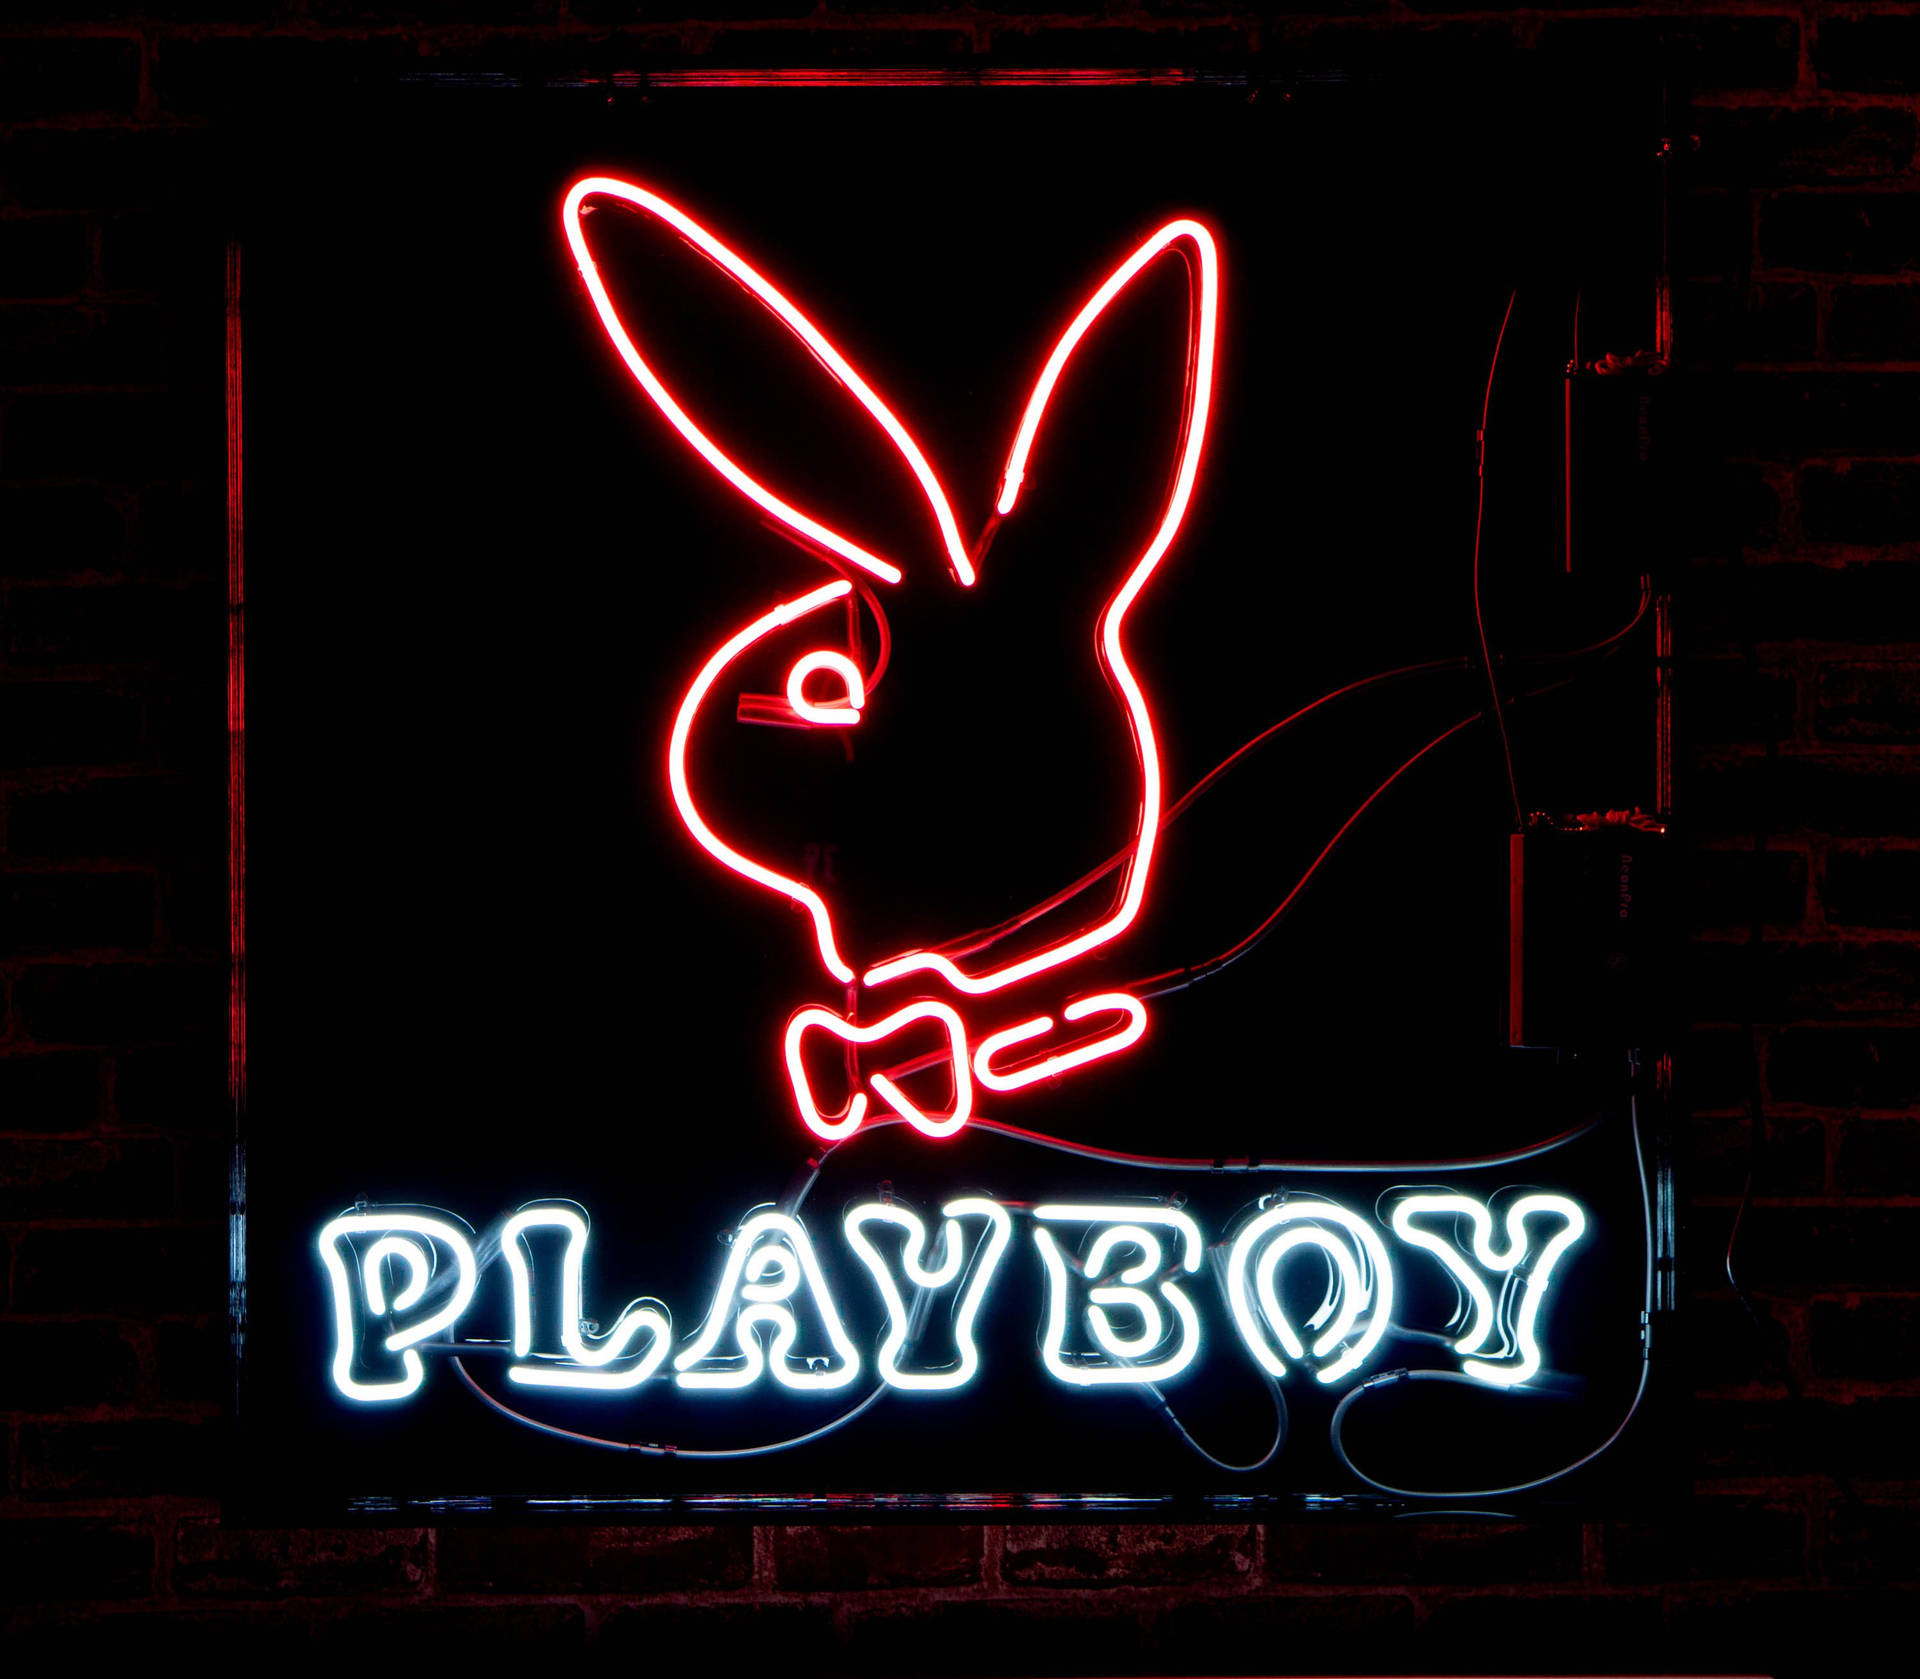 Free Playboy Wallpaper Downloads, [100+] Playboy Wallpapers for FREE |  